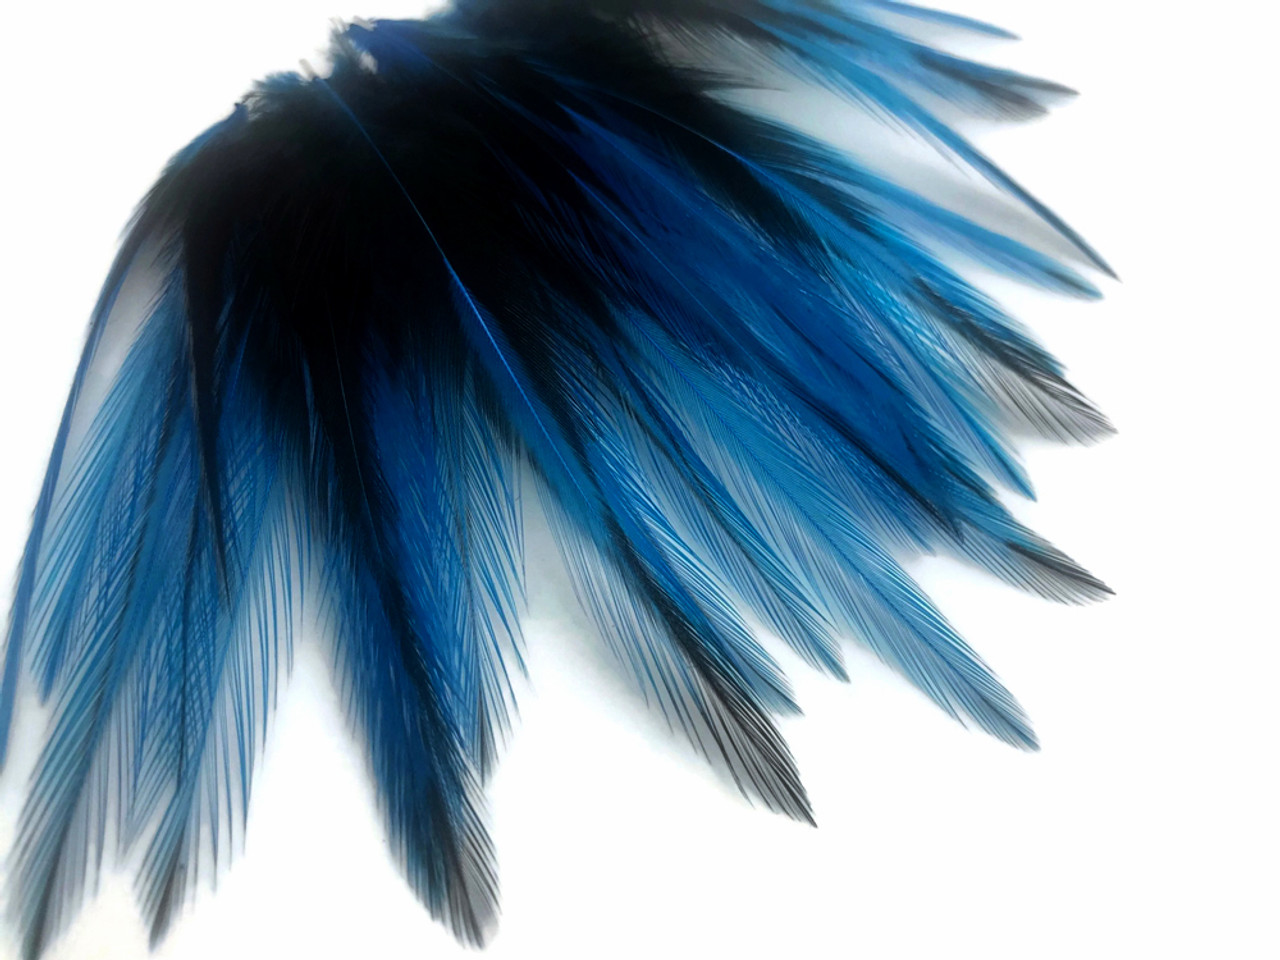 Rooster Feathers, 4-6” Natural Rooster Badger Saddle Strung Craft Feathers